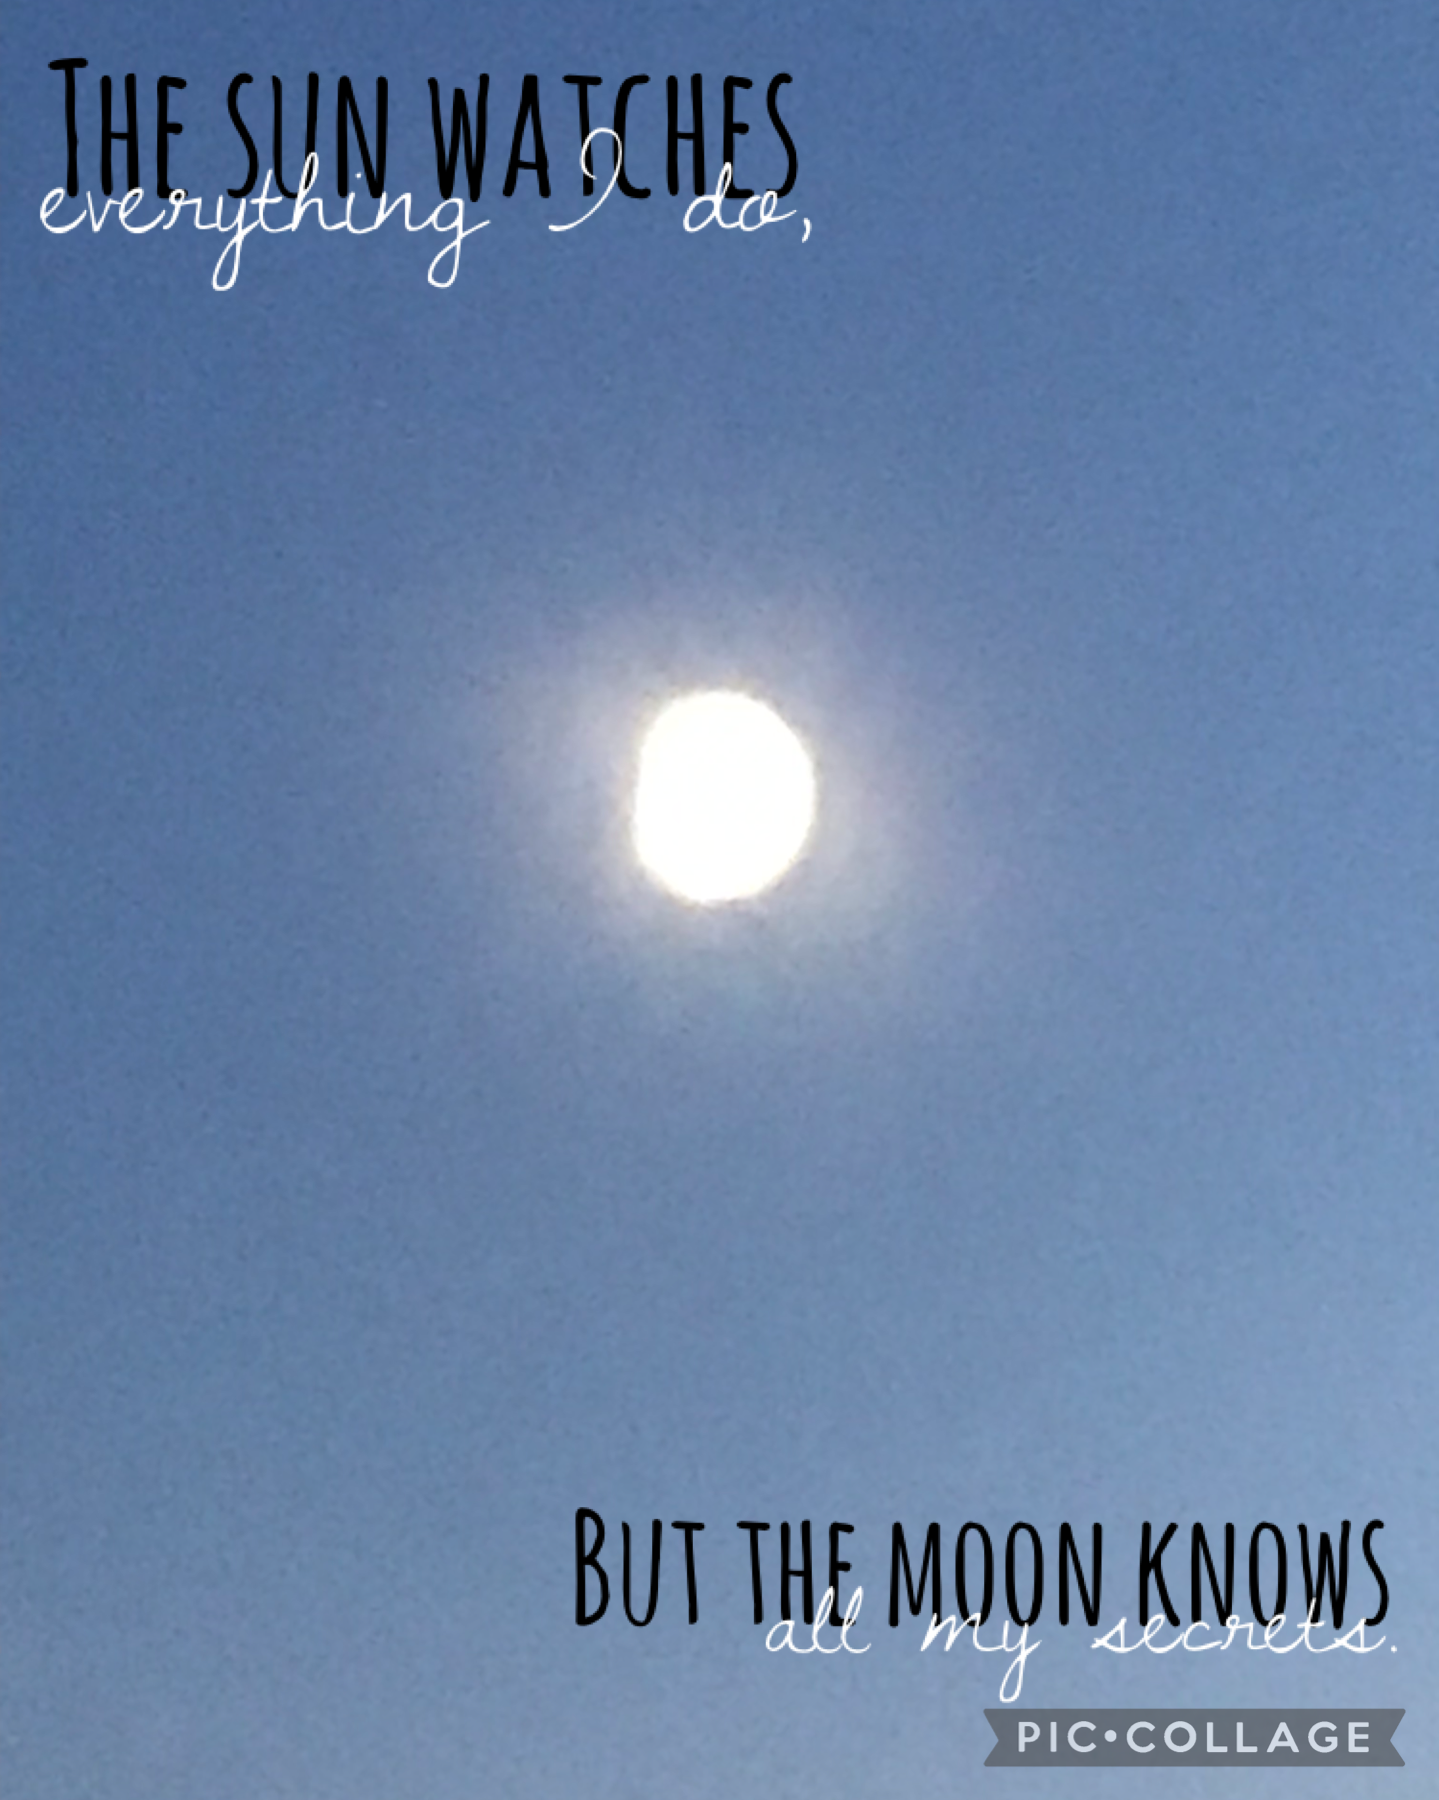 🌔tap🌔
Here’s a moon aesthetic! If it looks like the sun it’s bc the moon was bright white and my iPhone’s camera is terrible with a capital T bc it’s an iPhone 7🙄
Anywho enjoy this, Wisps! 